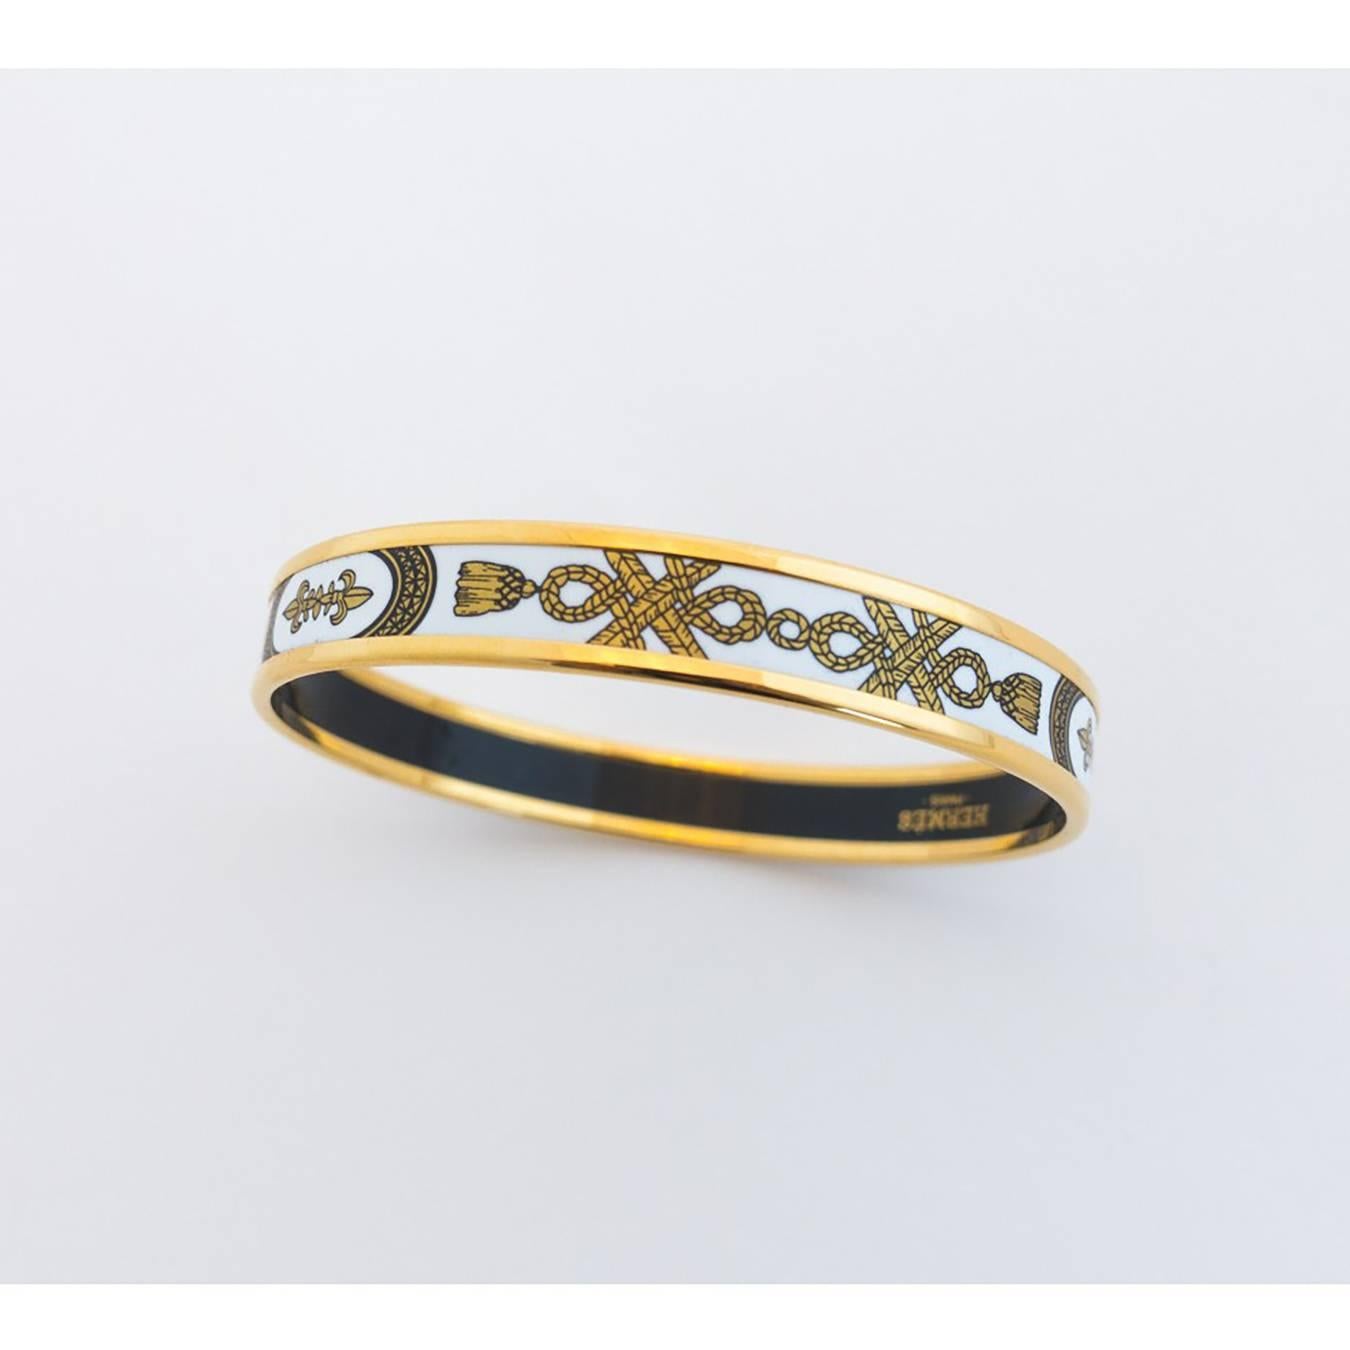 Store fresh. Pristine condition.
Perfect gift! Comes full set with Hermes velvet sleeper, box, and ribbon.
Compelling Hermes fine enamel bracelet.
Printed design in black and white.
Trimmed with luxurious gold.
Classic and glamorous!
Size 70